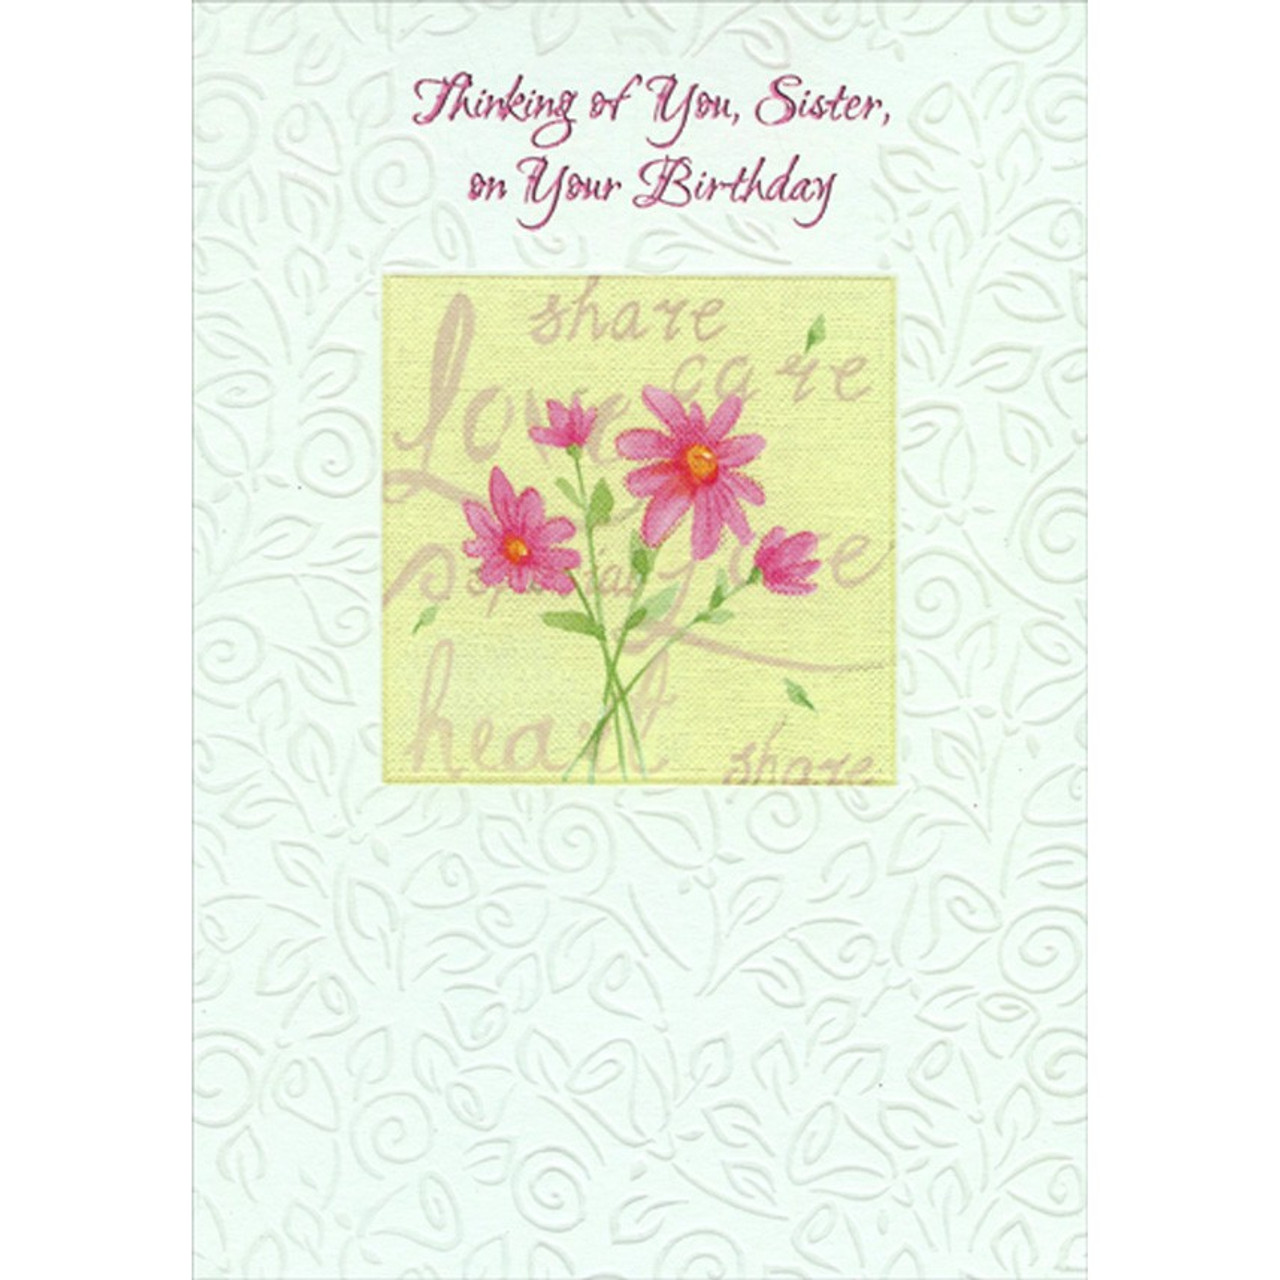 Designer Greetings Four Pink Flowers in Light Yellow Square Frame Birthday Card for Sister, Size: 5.25 x 7.5